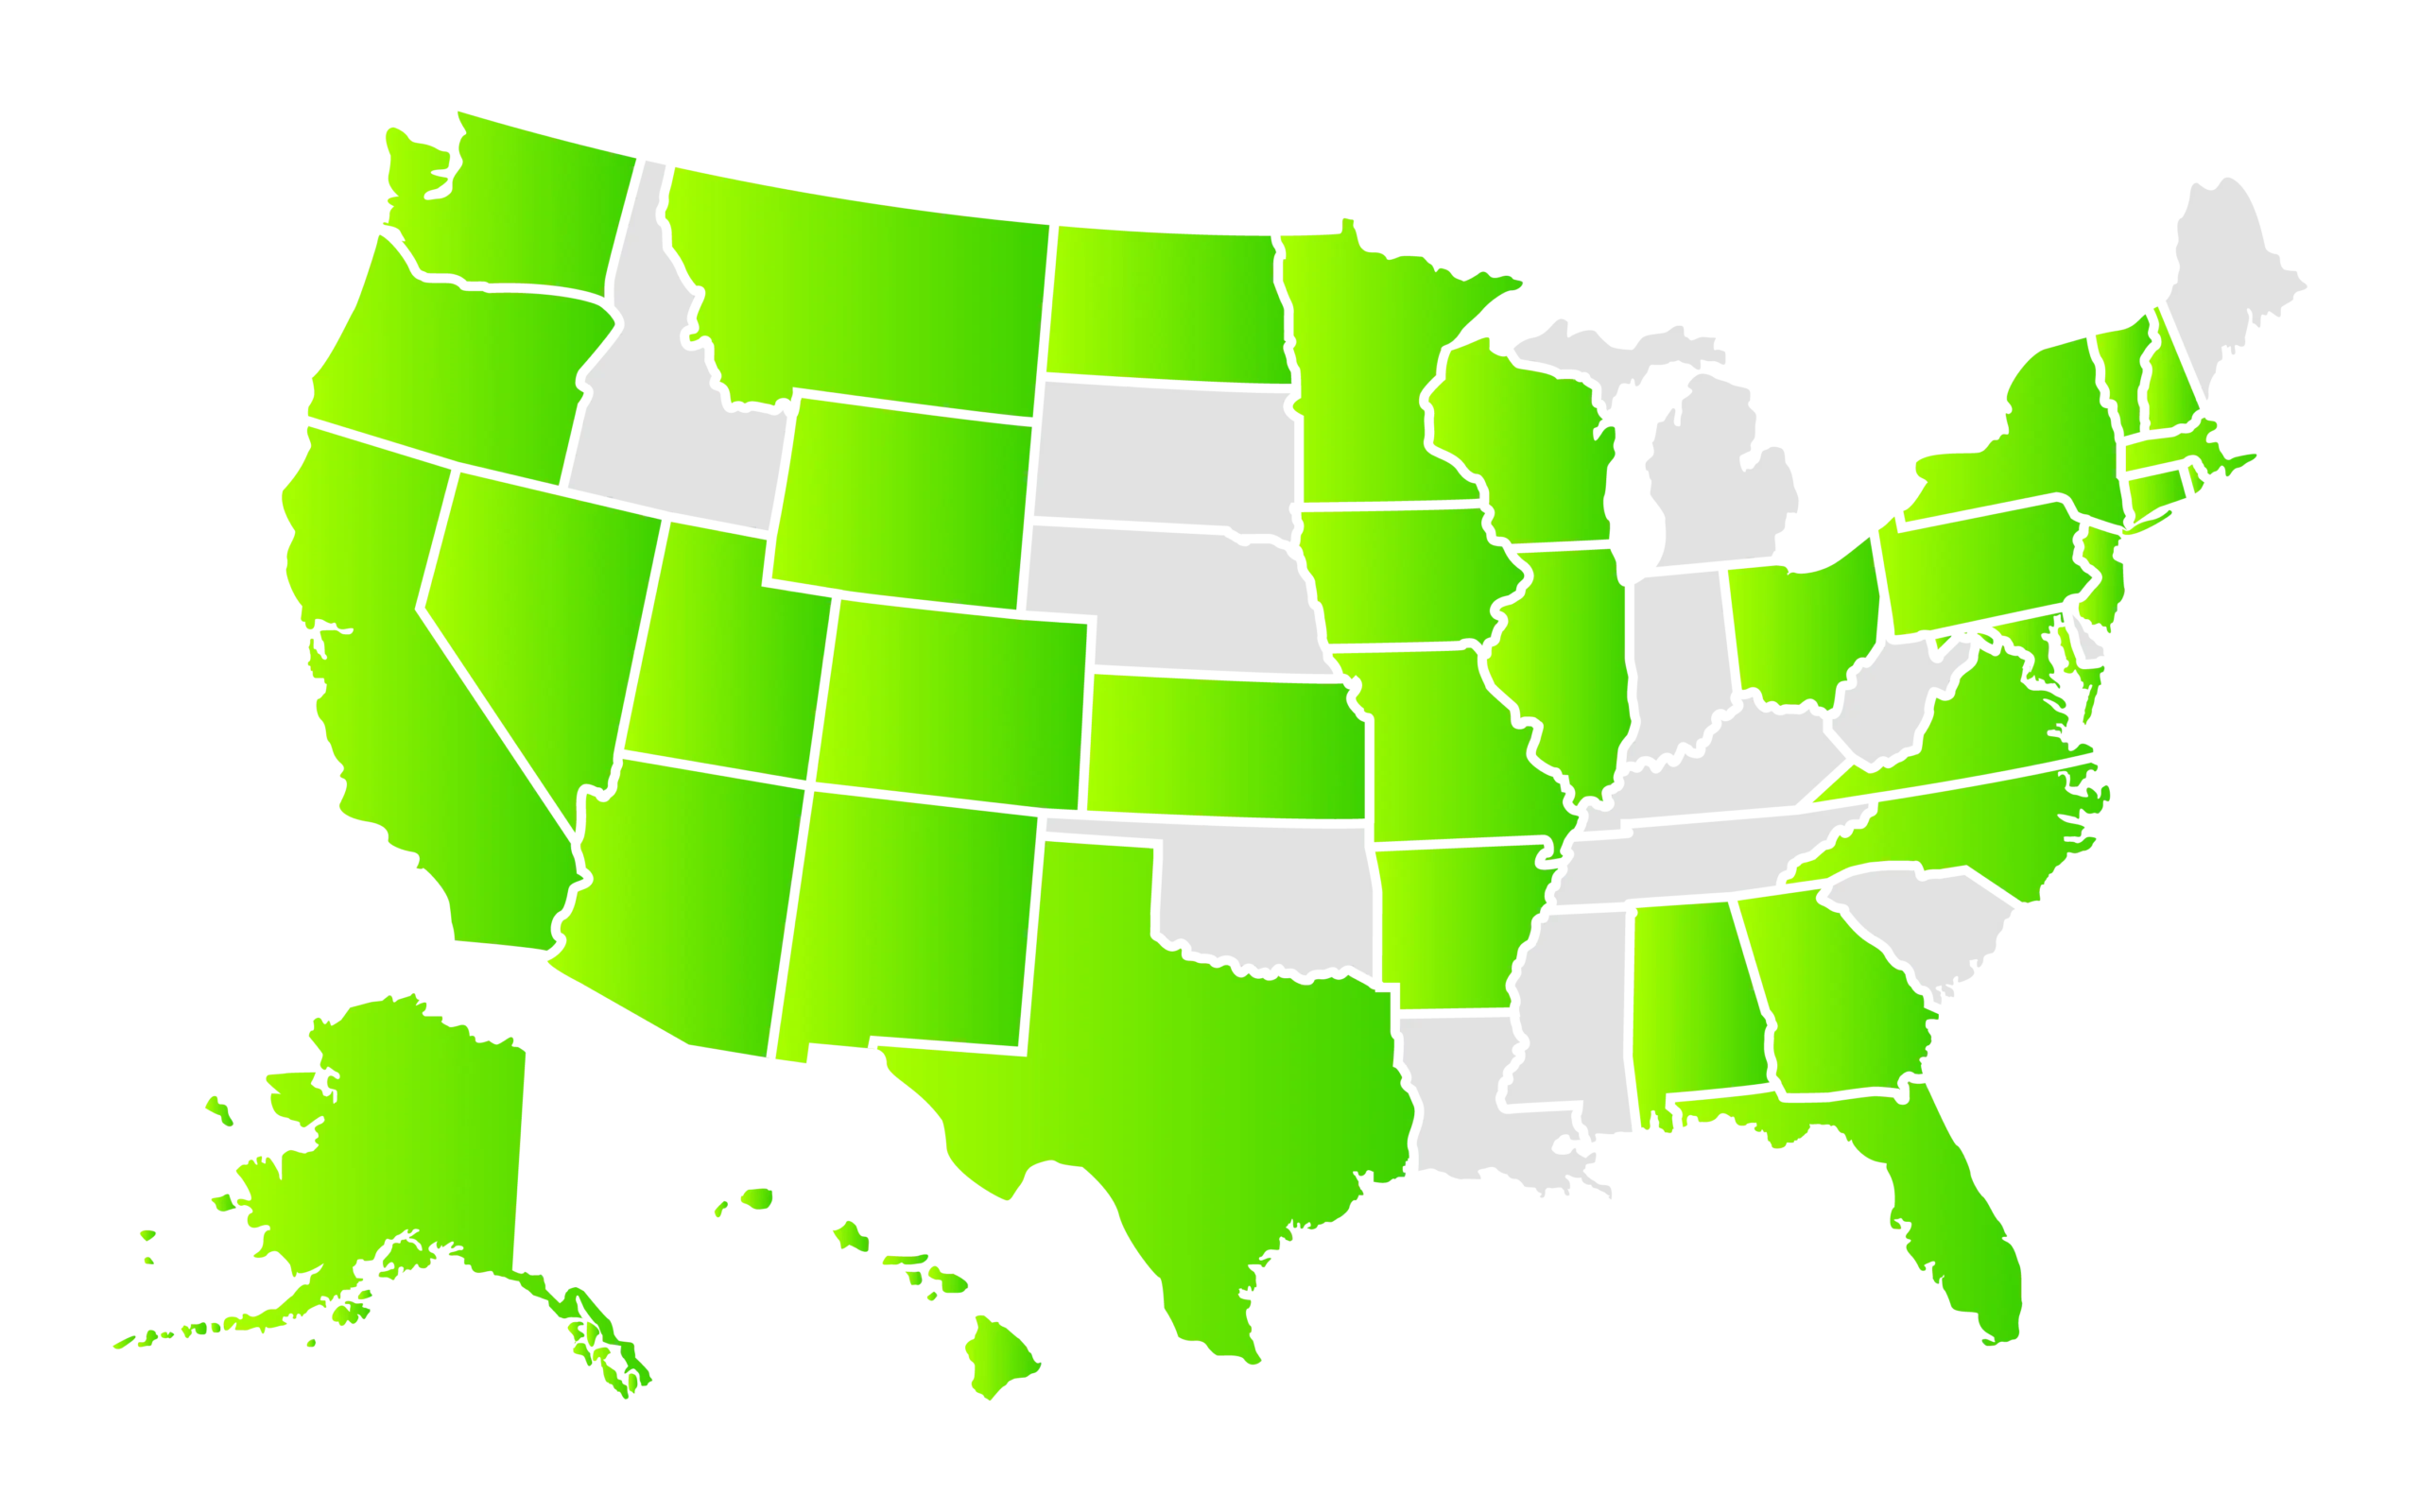 Map of the United States with 36 states filled in.